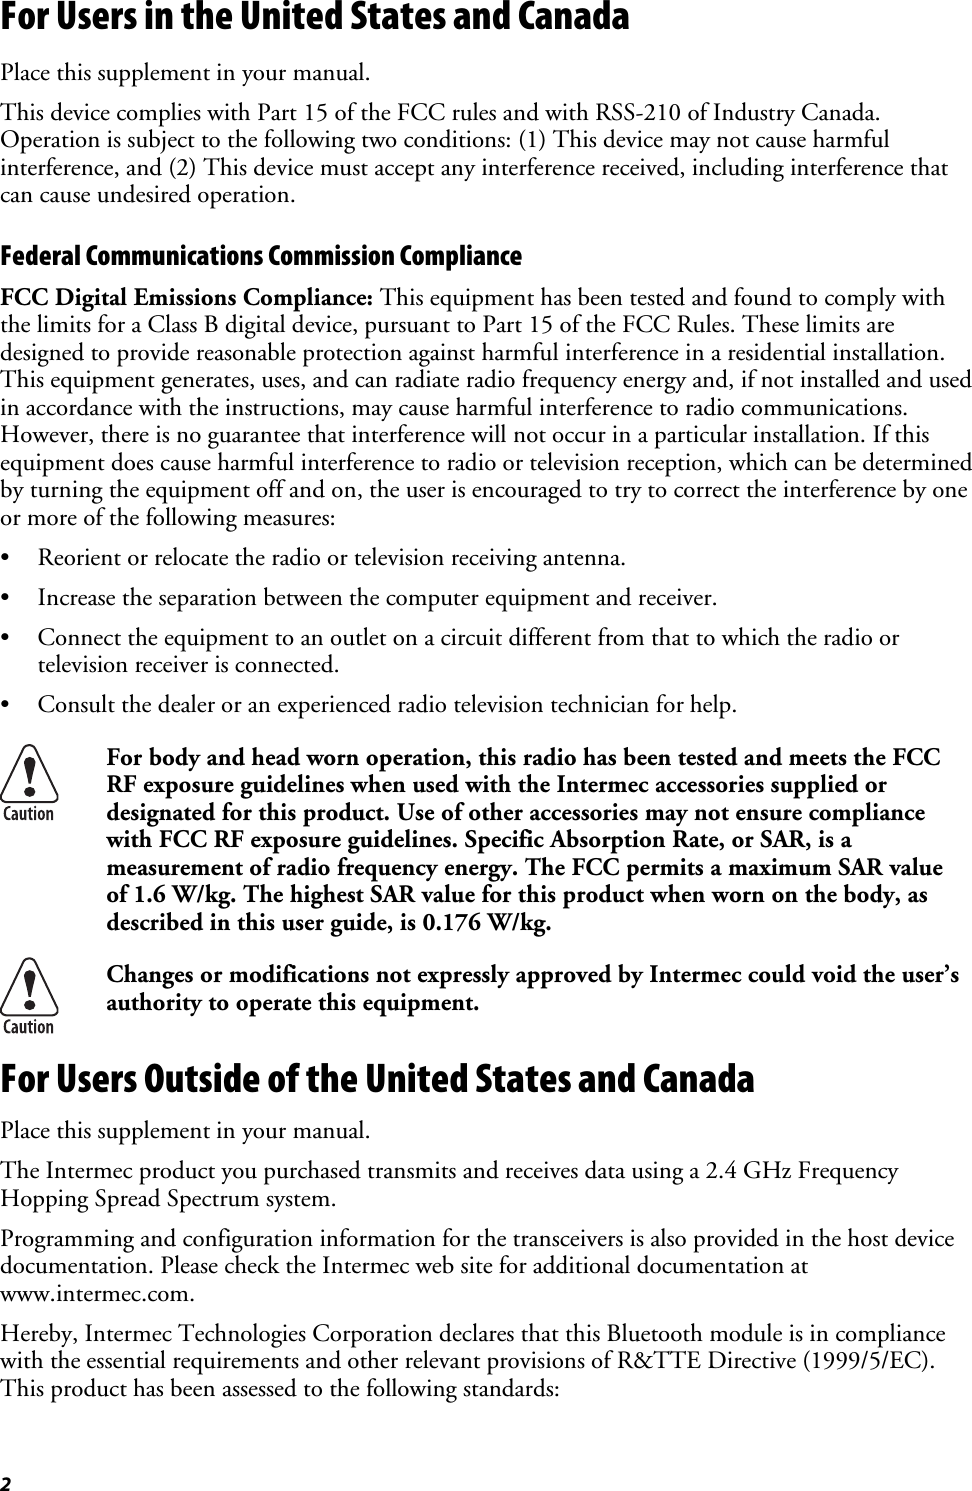 2 For Users in the United States and Canada Place this supplement in your manual. This device complies with Part 15 of the FCC rules and with RSS-210 of Industry Canada. Operation is subject to the following two conditions: (1) This device may not cause harmful interference, and (2) This device must accept any interference received, including interference that can cause undesired operation. Federal Communications Commission Compliance  FCC Digital Emissions Compliance: This equipment has been tested and found to comply with the limits for a Class B digital device, pursuant to Part 15 of the FCC Rules. These limits are designed to provide reasonable protection against harmful interference in a residential installation. This equipment generates, uses, and can radiate radio frequency energy and, if not installed and used in accordance with the instructions, may cause harmful interference to radio communications. However, there is no guarantee that interference will not occur in a particular installation. If this equipment does cause harmful interference to radio or television reception, which can be determined by turning the equipment off and on, the user is encouraged to try to correct the interference by one or more of the following measures: •  Reorient or relocate the radio or television receiving antenna. •  Increase the separation between the computer equipment and receiver. •  Connect the equipment to an outlet on a circuit different from that to which the radio or television receiver is connected. •  Consult the dealer or an experienced radio television technician for help.  For body and head worn operation, this radio has been tested and meets the FCC RF exposure guidelines when used with the Intermec accessories supplied or designated for this product. Use of other accessories may not ensure compliance with FCC RF exposure guidelines. Specific Absorption Rate, or SAR, is a measurement of radio frequency energy. The FCC permits a maximum SAR value of 1.6 W/kg. The highest SAR value for this product when worn on the body, as described in this user guide, is 0.176 W/kg.  Changes or modifications not expressly approved by Intermec could void the user’s authority to operate this equipment. For Users Outside of the United States and Canada Place this supplement in your manual. The Intermec product you purchased transmits and receives data using a 2.4 GHz Frequency Hopping Spread Spectrum system. Programming and configuration information for the transceivers is also provided in the host device documentation. Please check the Intermec web site for additional documentation at www.intermec.com. Hereby, Intermec Technologies Corporation declares that this Bluetooth module is in compliance with the essential requirements and other relevant provisions of R&amp;TTE Directive (1999/5/EC). This product has been assessed to the following standards: 